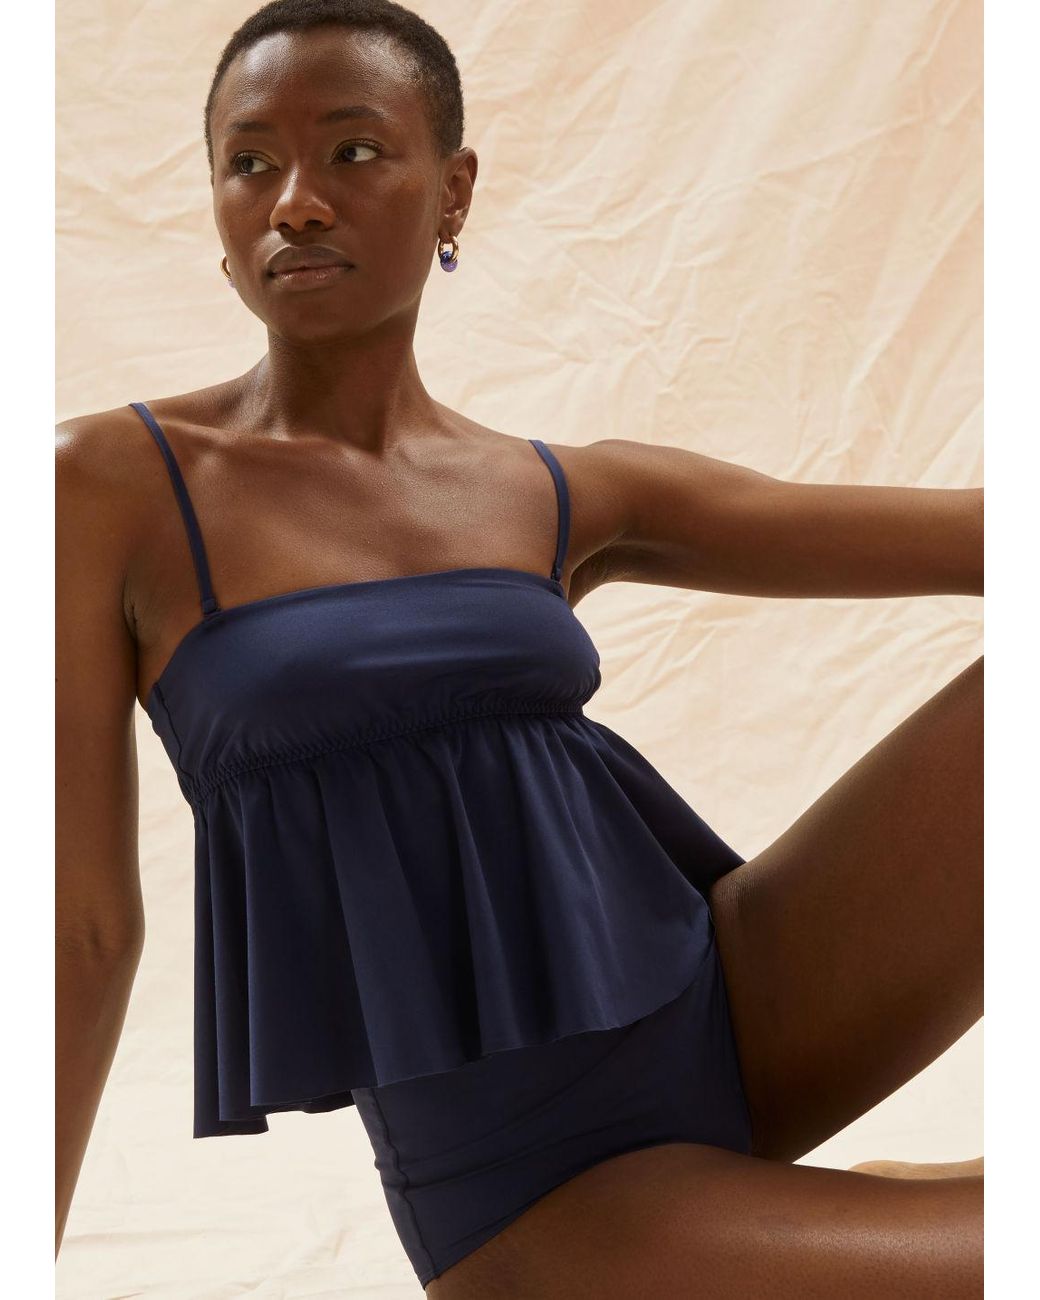 & Other Stories Ruffle Tankini Top in Blue | Lyst